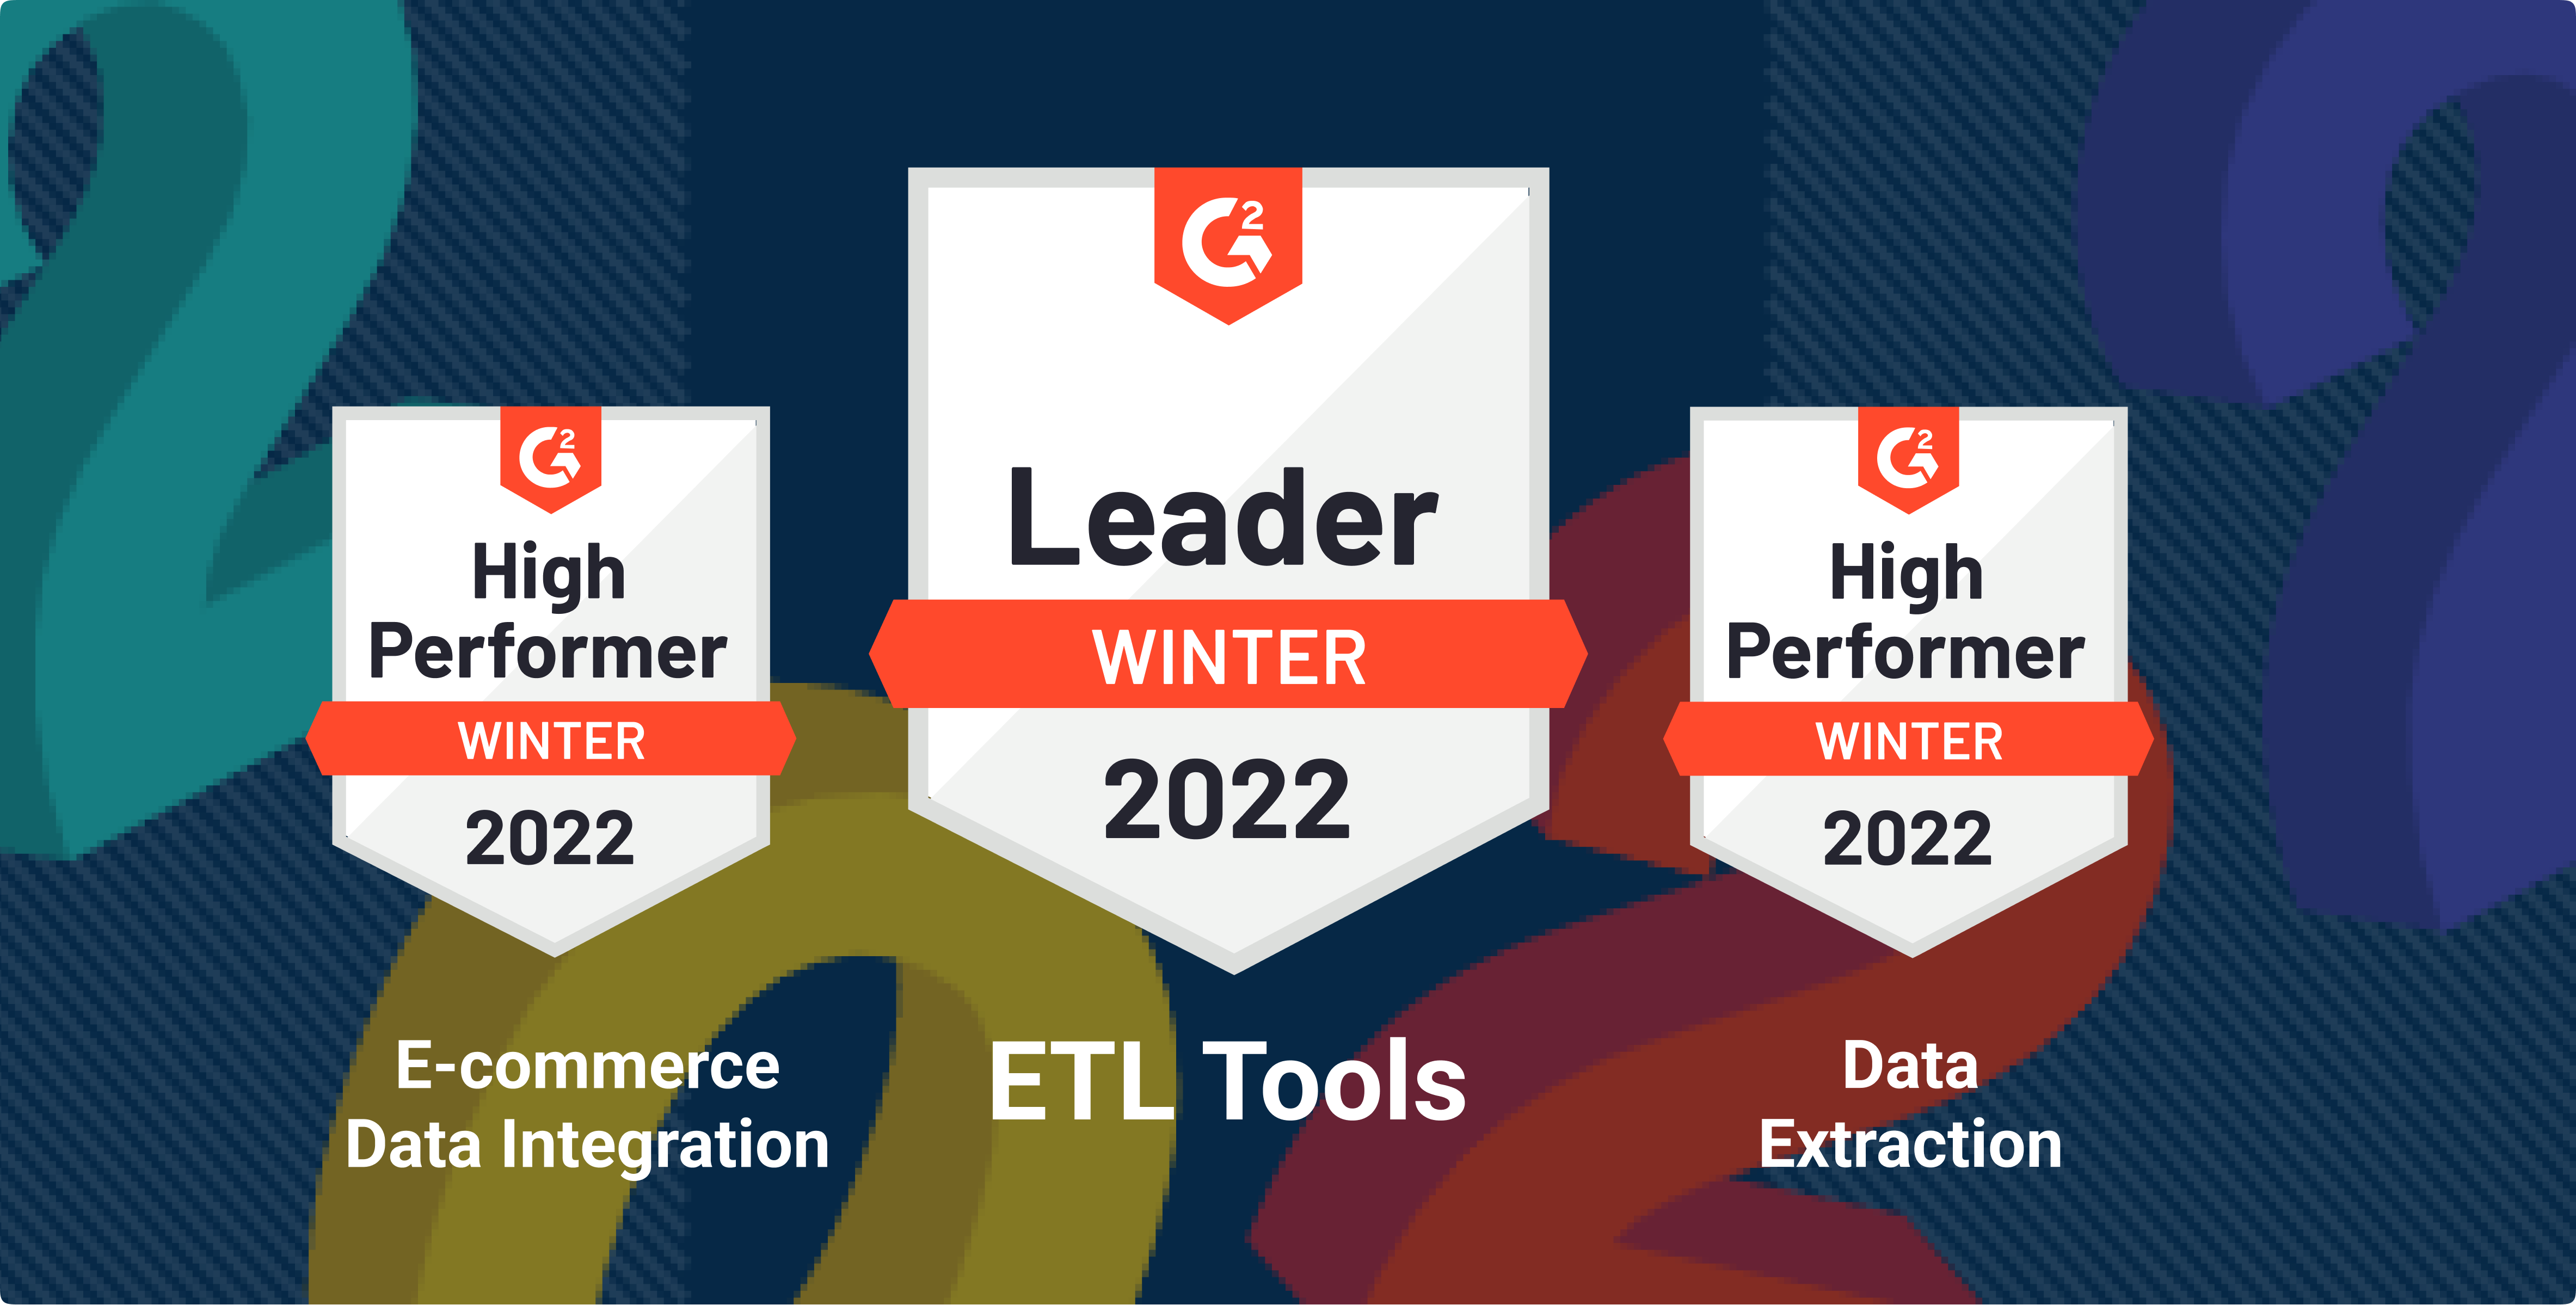 Dataddo's badges from G2. Includes Winter 2022 High Performer in the categories E-commerce Data Integration, and Data Extraction, and Winter 2022 Leader in ETL Tools.